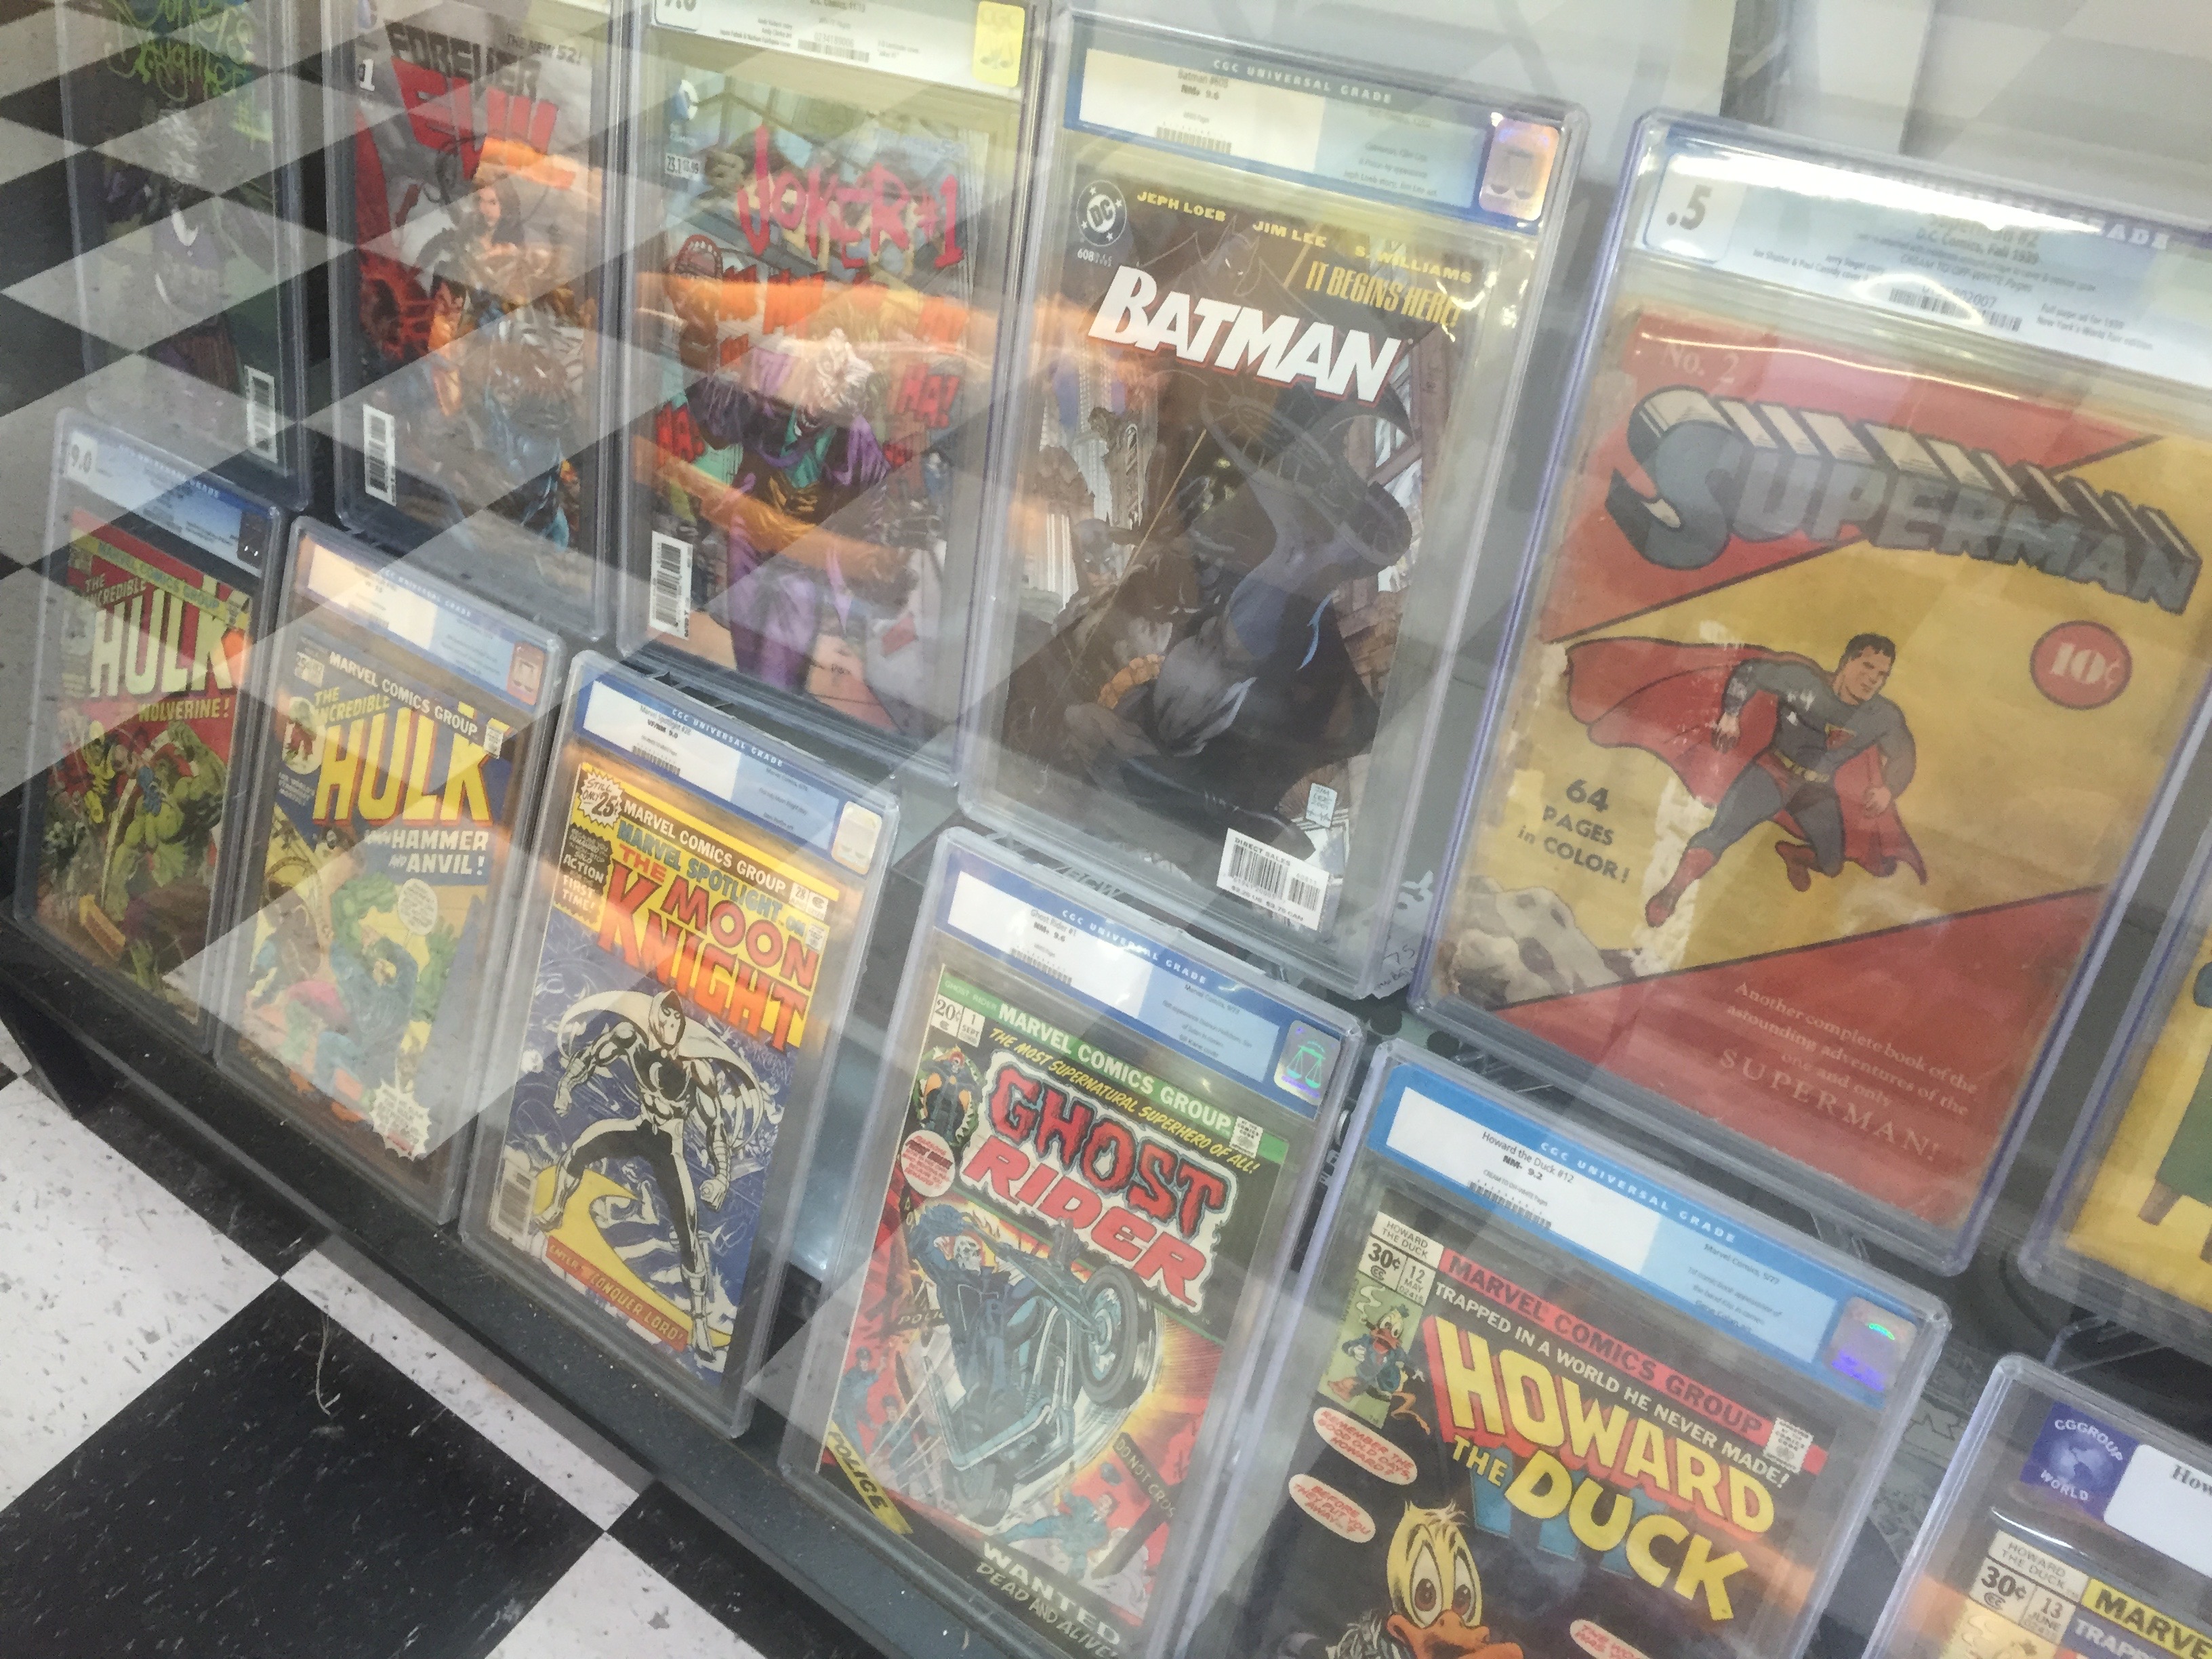 <span  class="uc_style_uc_tiles_grid_image_elementor_uc_items_attribute_title" style="color:#ffffff;">Graded Comics at Mammoth Comics</span>